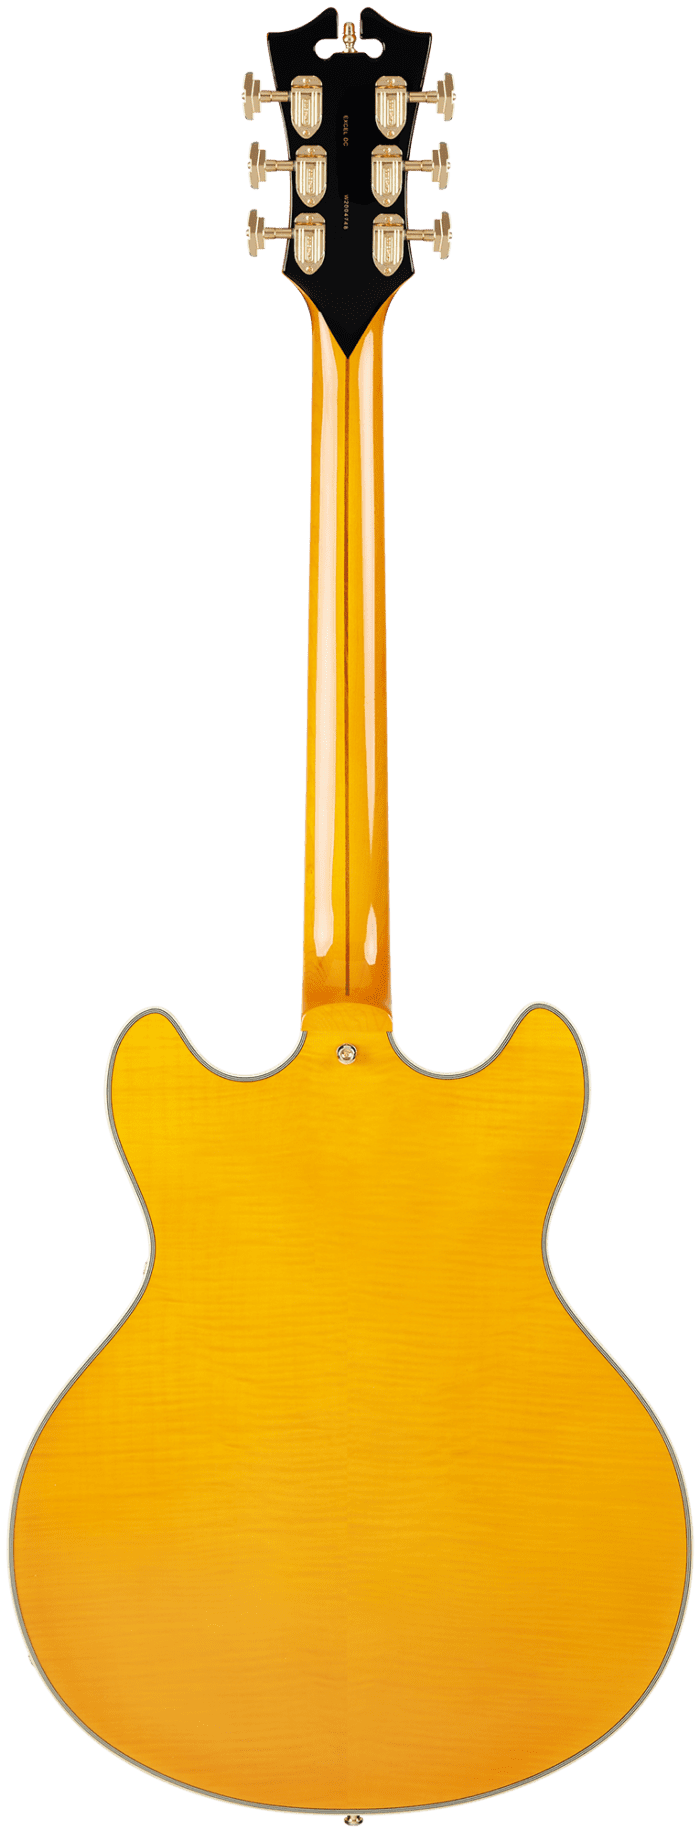 D'Angelico Excel DC Vintage Natural (w/ stop-bar tailpiece)